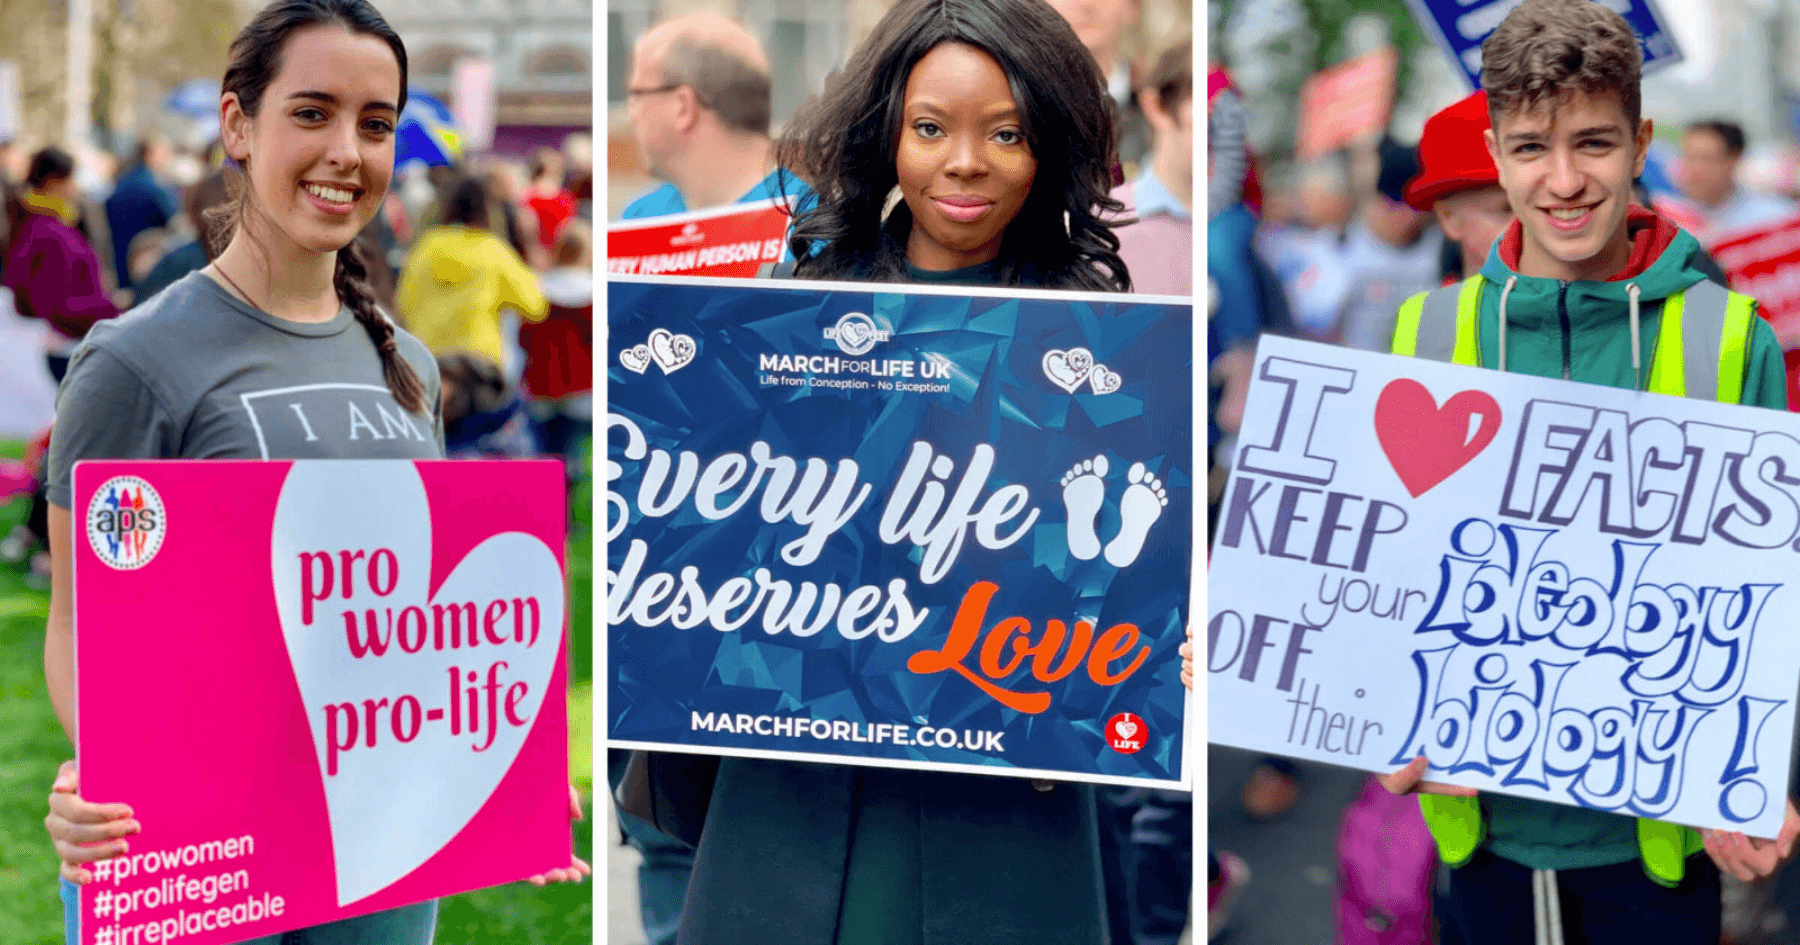 Thousands expected to join UK March for Life in London on 4 September